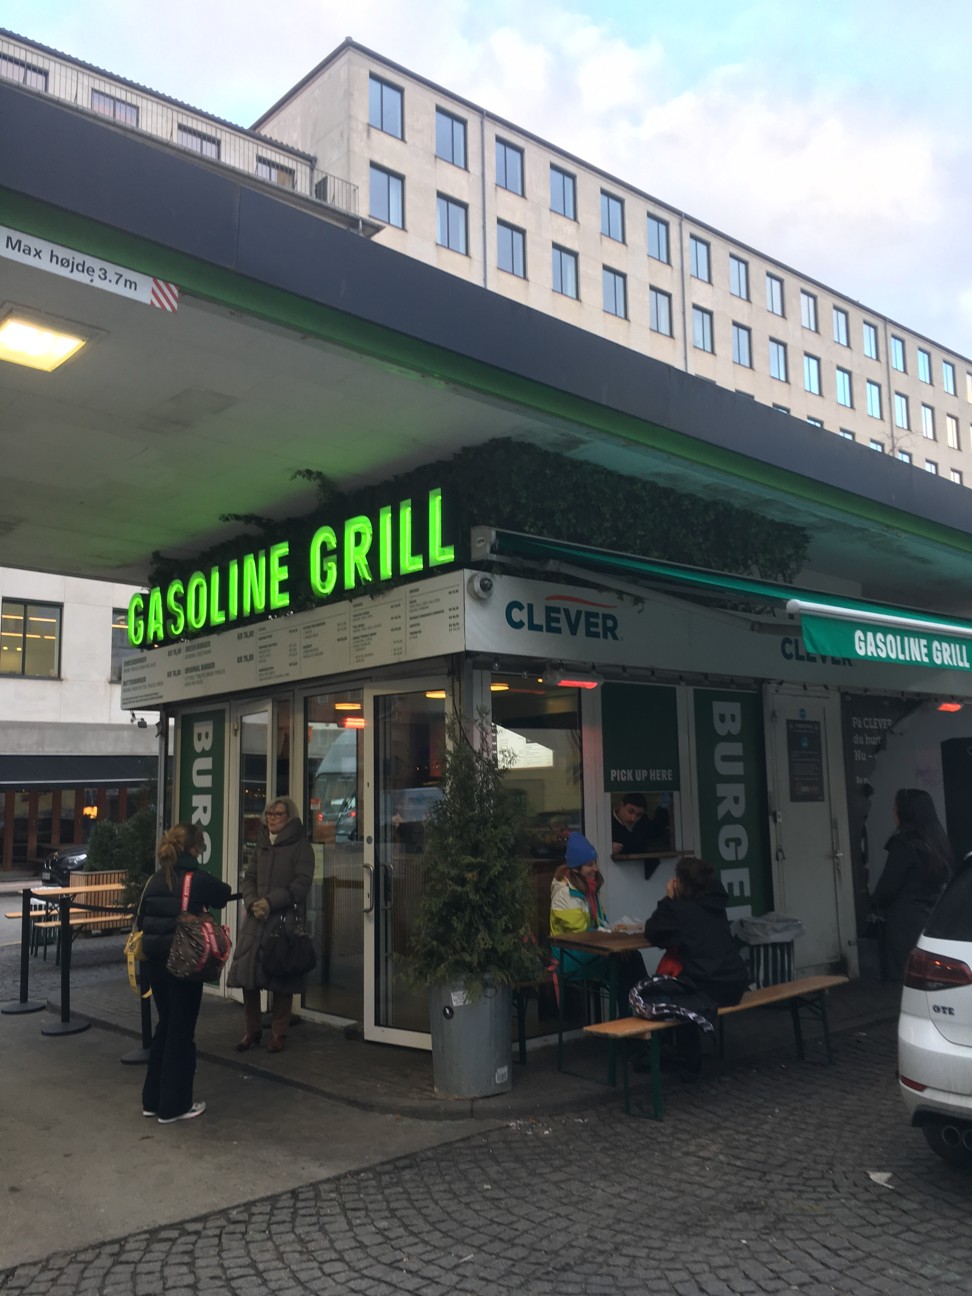 Gasoline Grill on the forecourt of a service station in Copenhagen. Its burgers are made to order and include a vegetarian option.